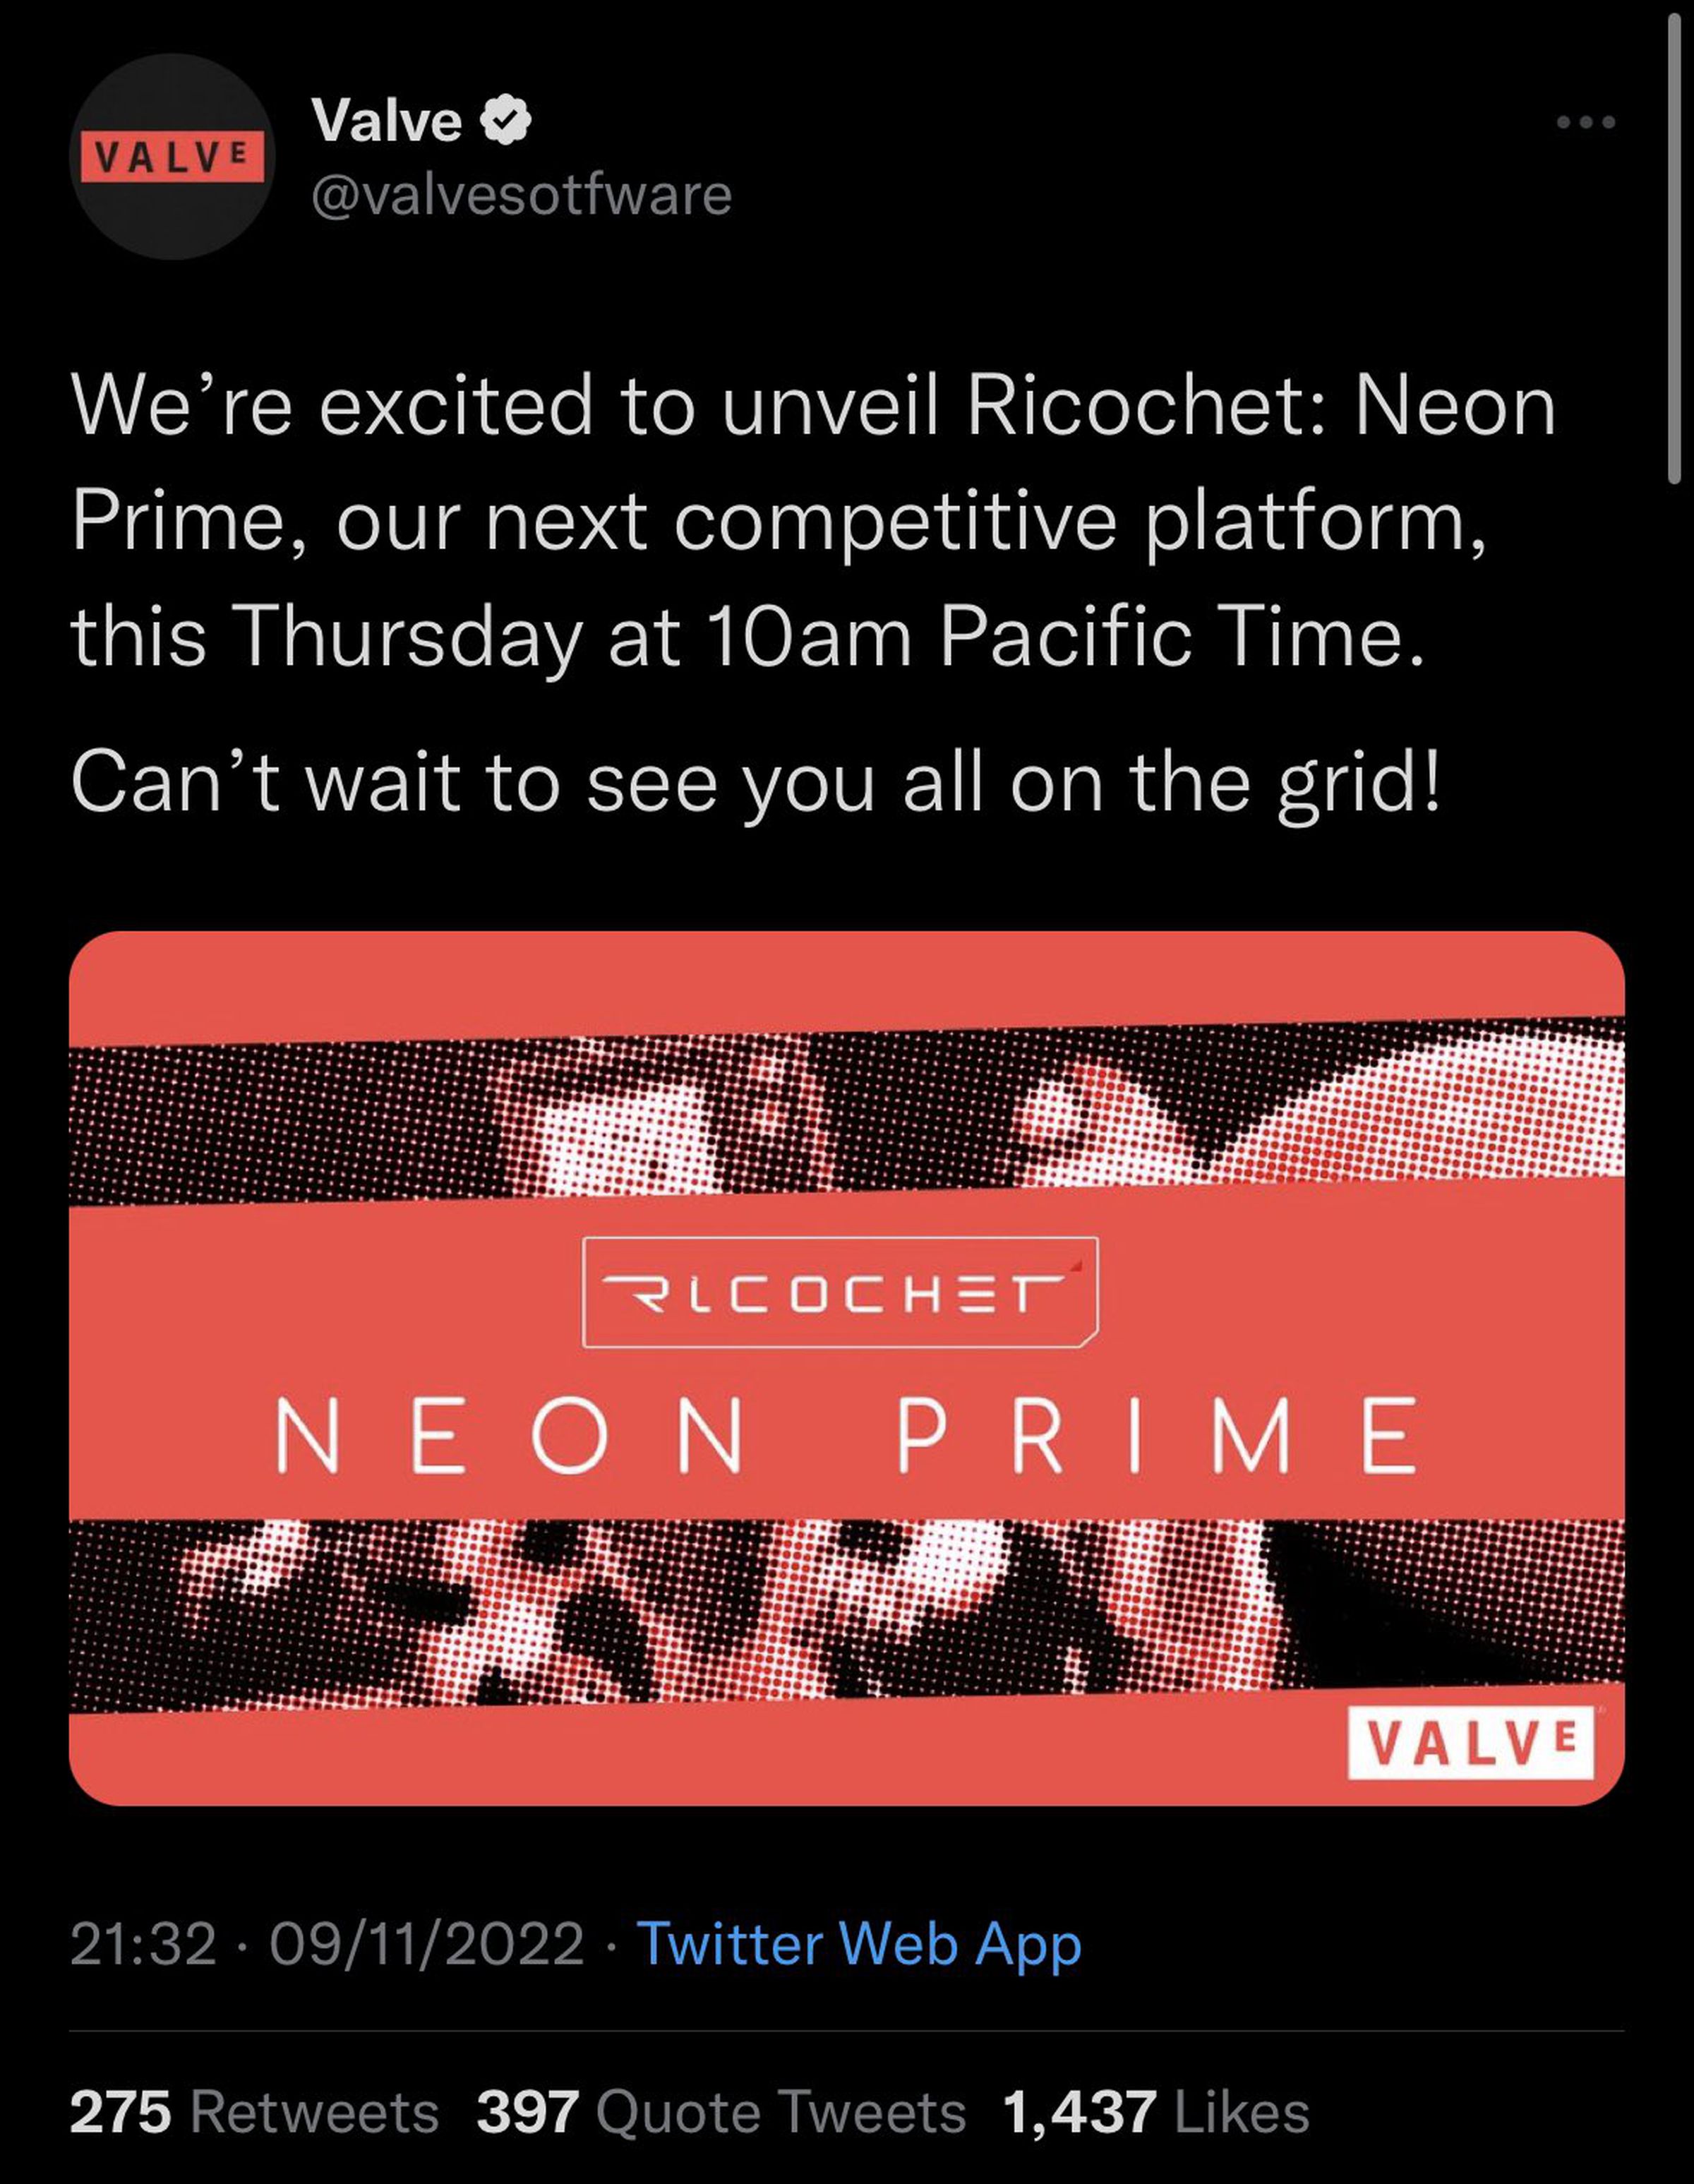 Neon Prime is Valve's trademark, but it's probably not for the return of Ricochet's discus.